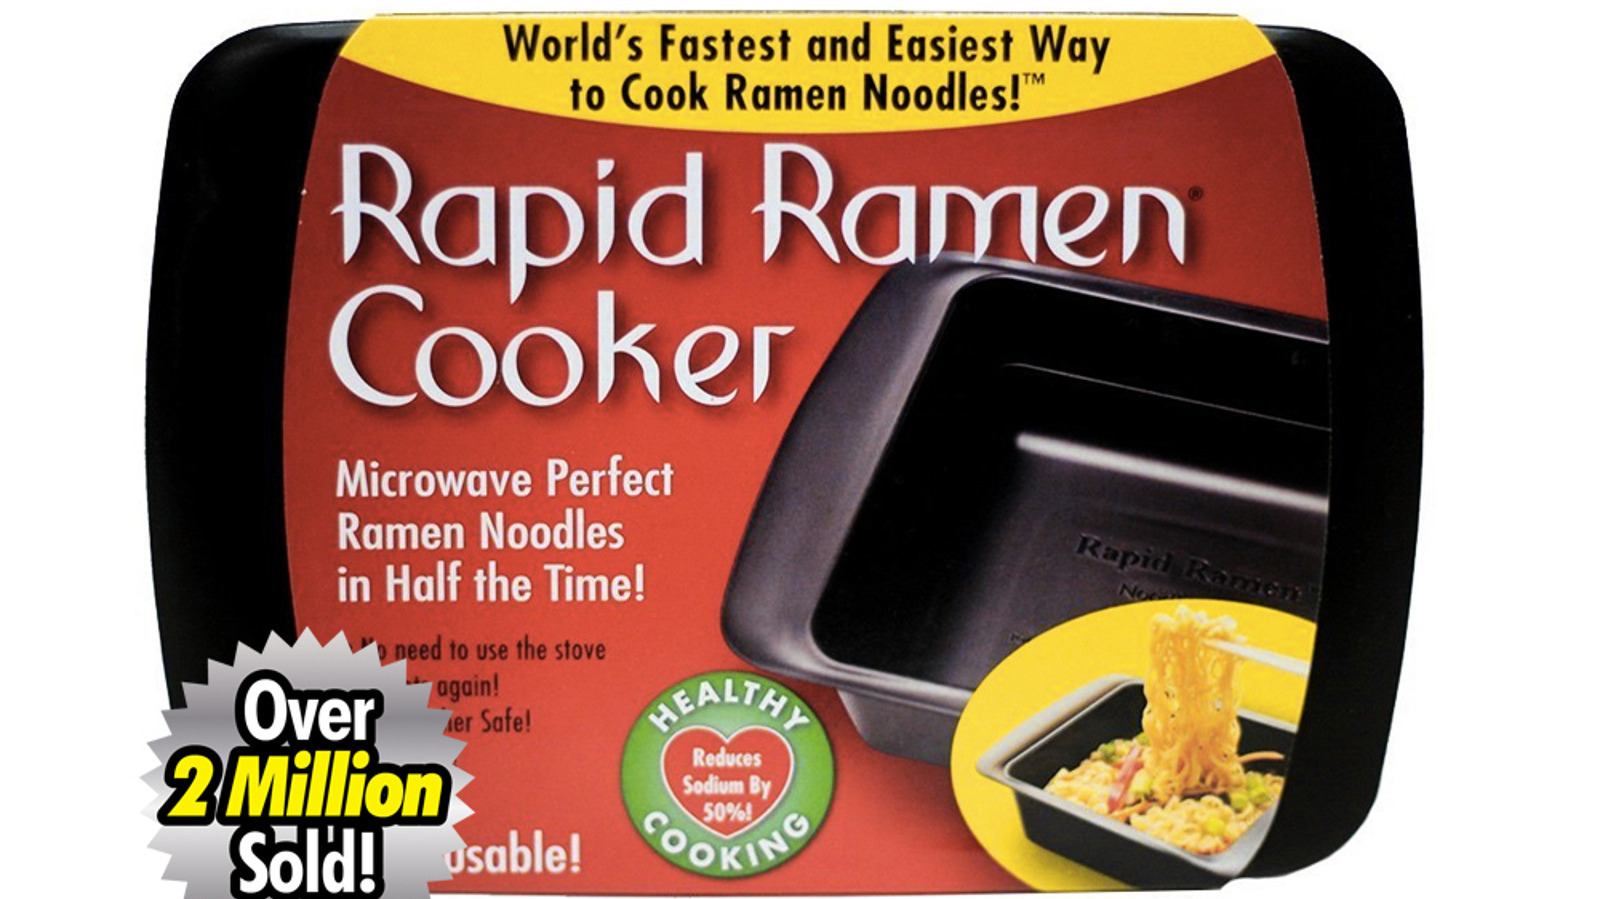 https://www.thedailymeal.com/img/gallery/where-is-rapid-ramen-cooker-from-shark-tank-today/l-intro-1675183642.jpg